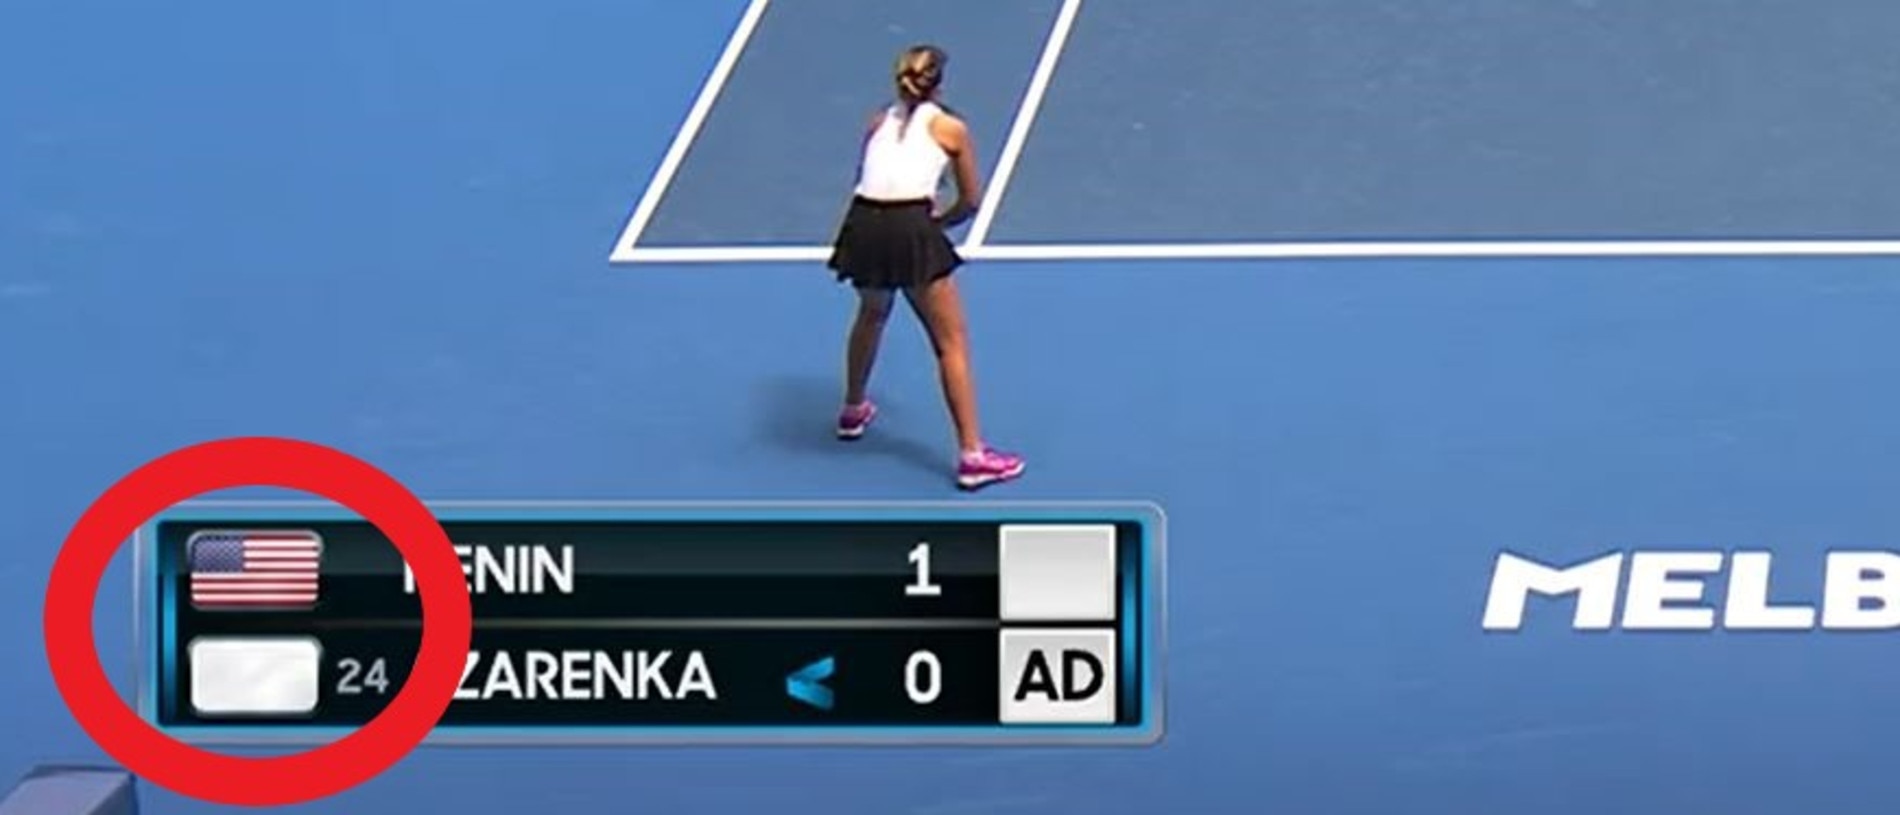 What country are tennis players under white flag at Australian Open 2023 from? empty flag spaces on TV, Belarus, Russia